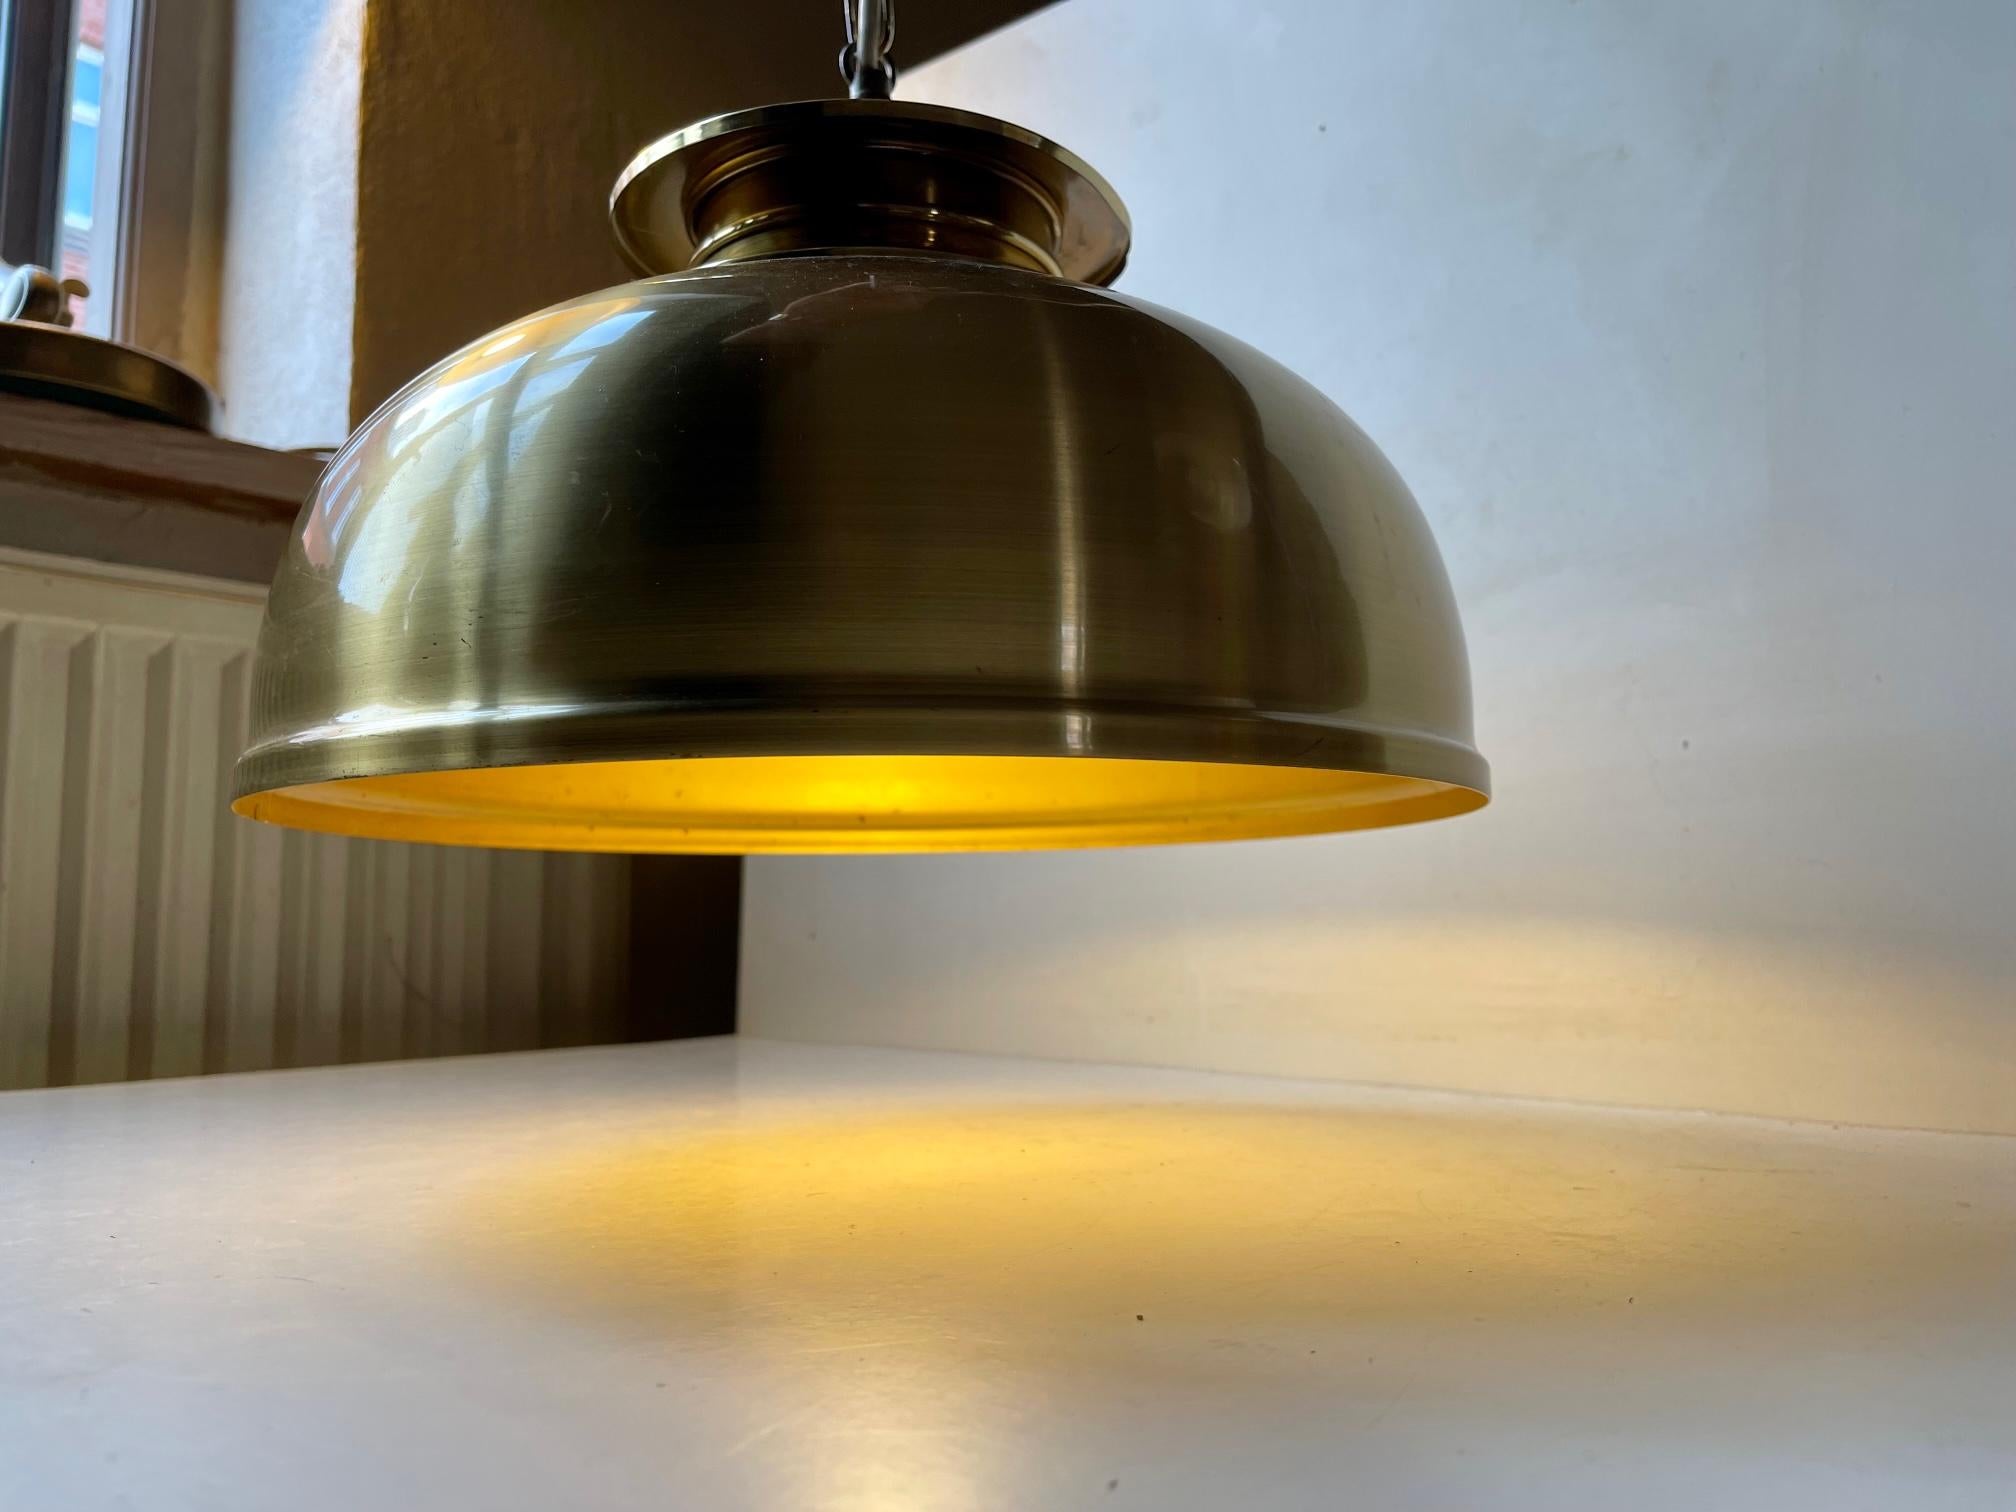 Beatifully made chain-suspended Scandinavian Ceiling Lamp by The style is Nautical/Maritime and it will add a cosy twist to any modern interior. The light is in a very nice vintage condition with a litlle ware and patination to the solid brass